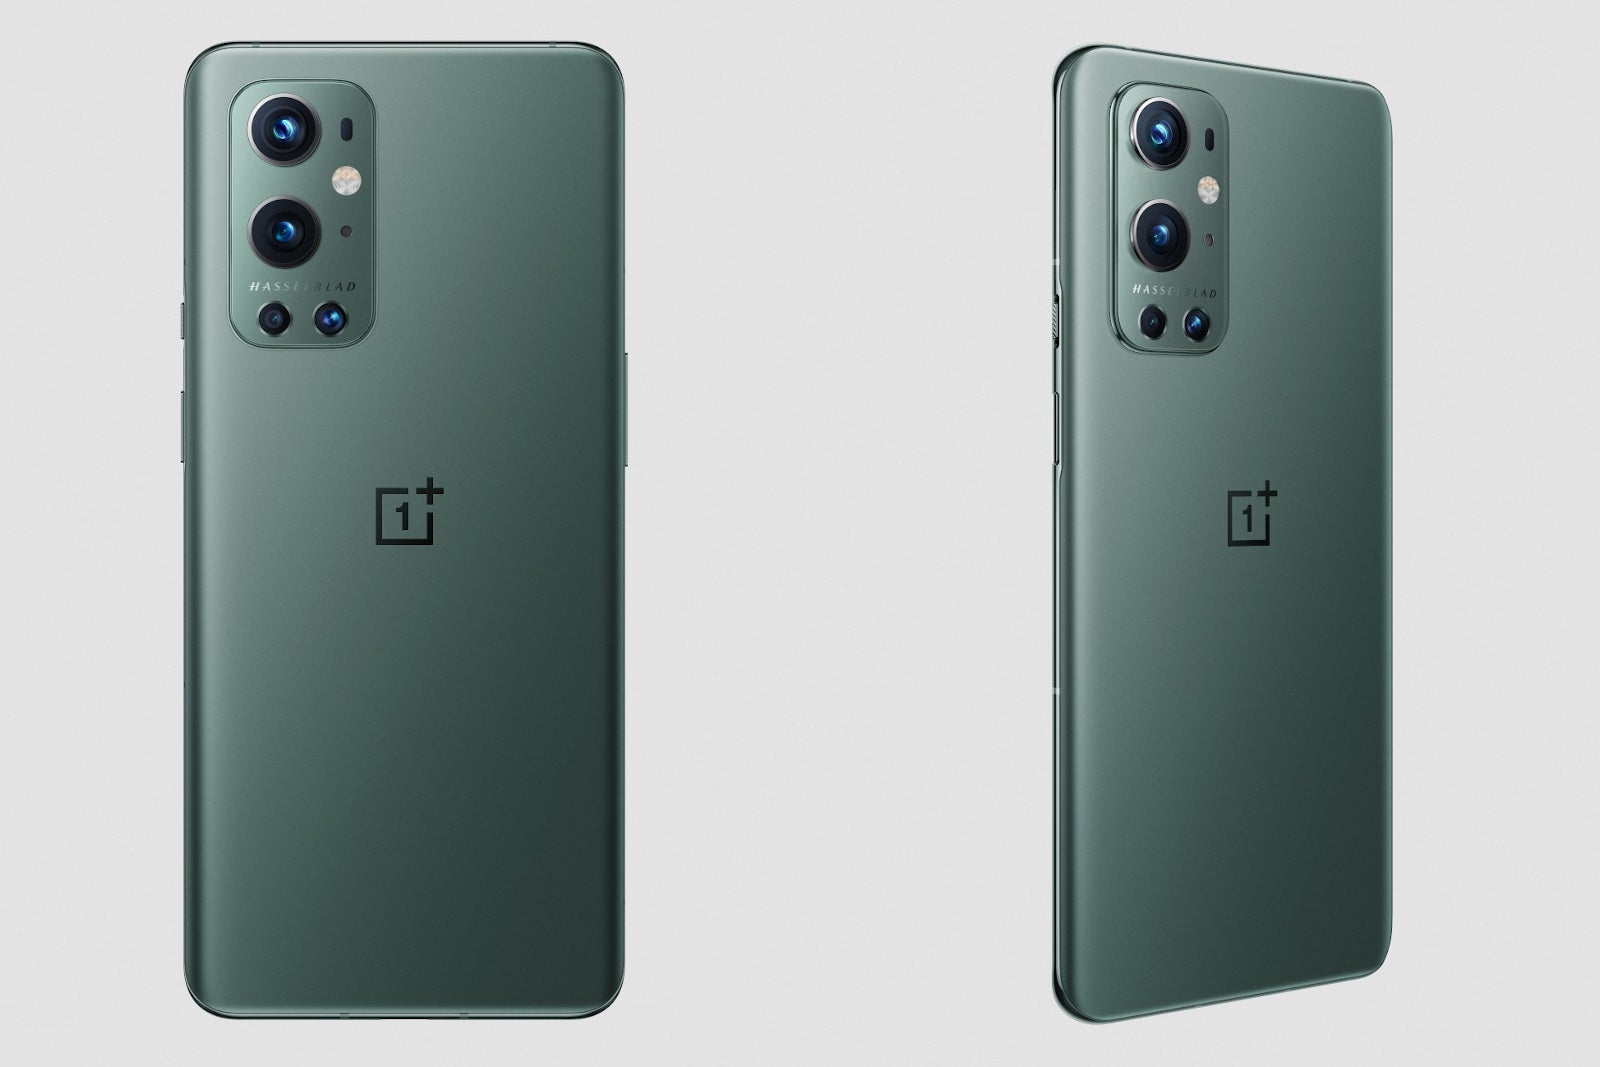 OnePlus 9 and OnePlus 9 Pro colors: which color should you buy?